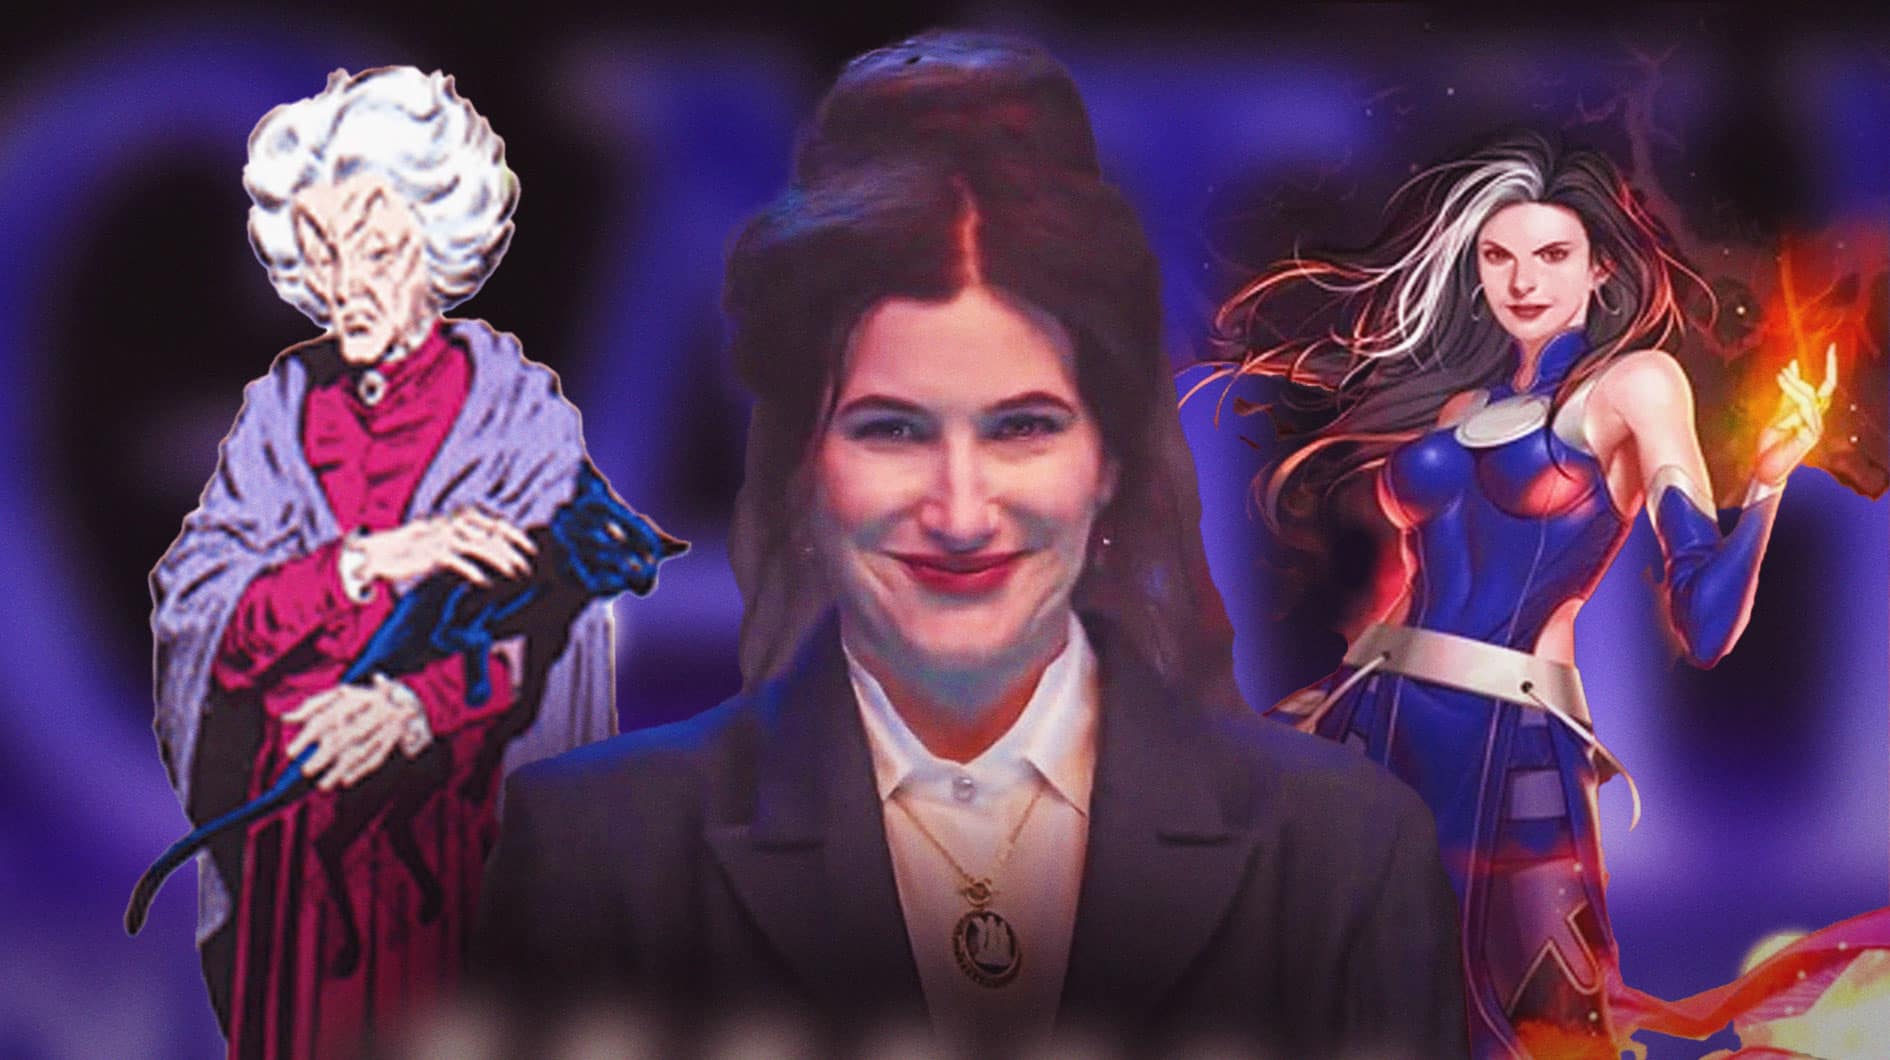 Kathryn Hahn as Agatha Harkness in the middle flanked by her comic versions